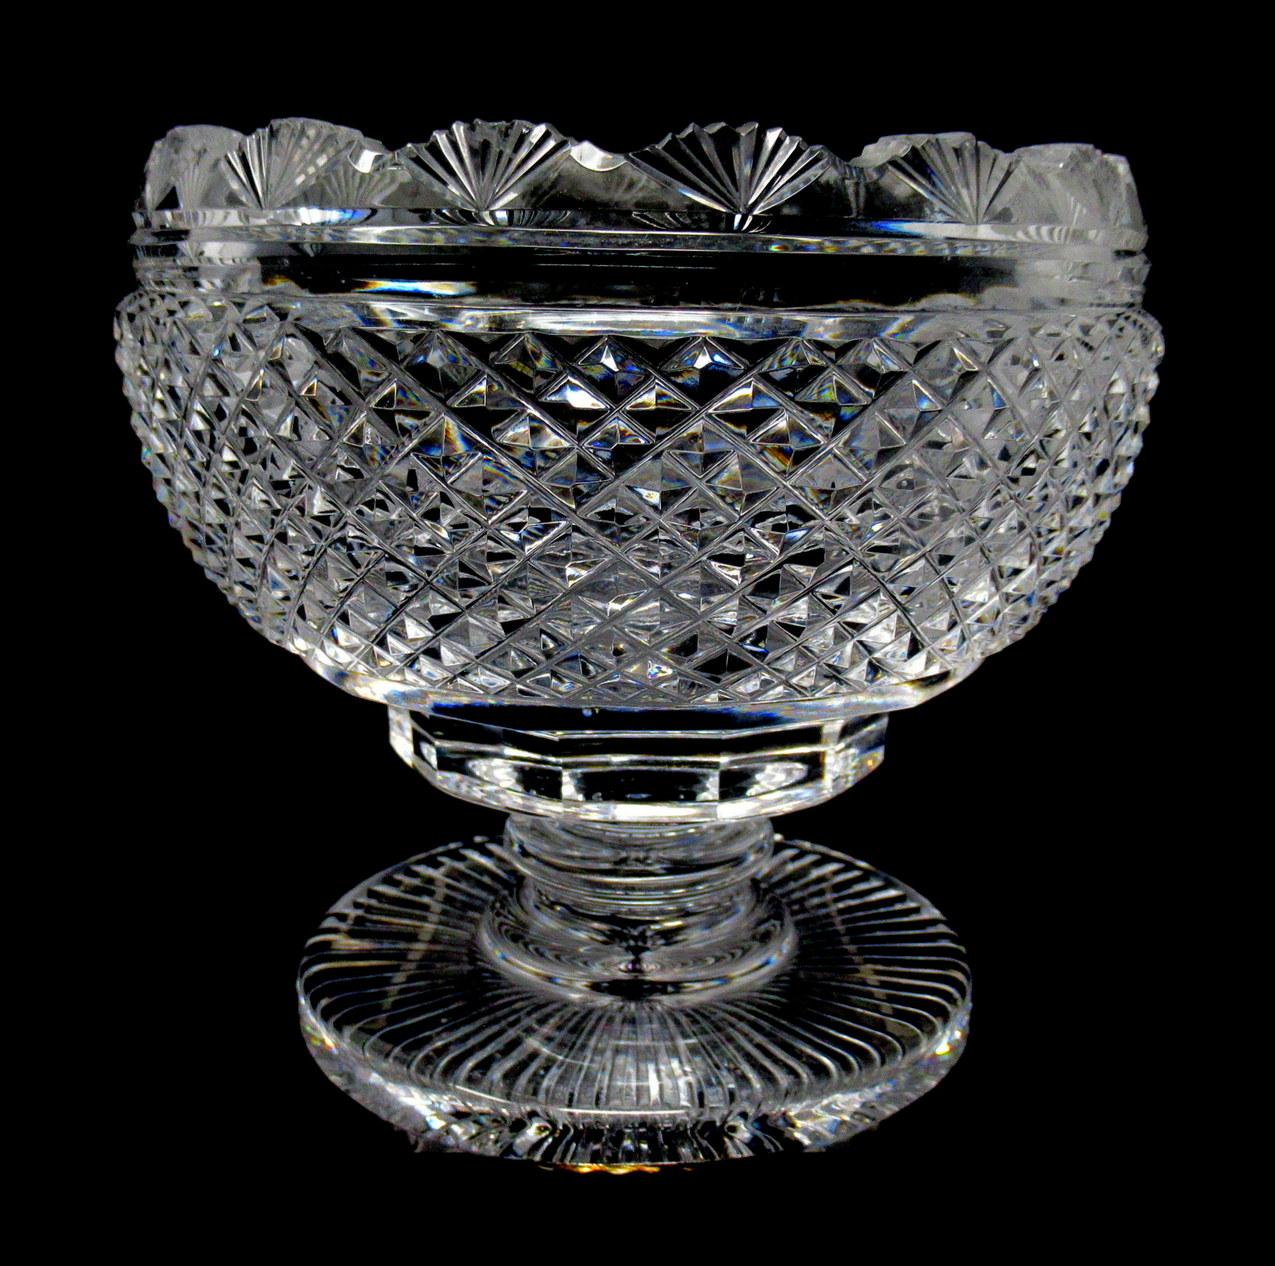 waterford crystal bowl value